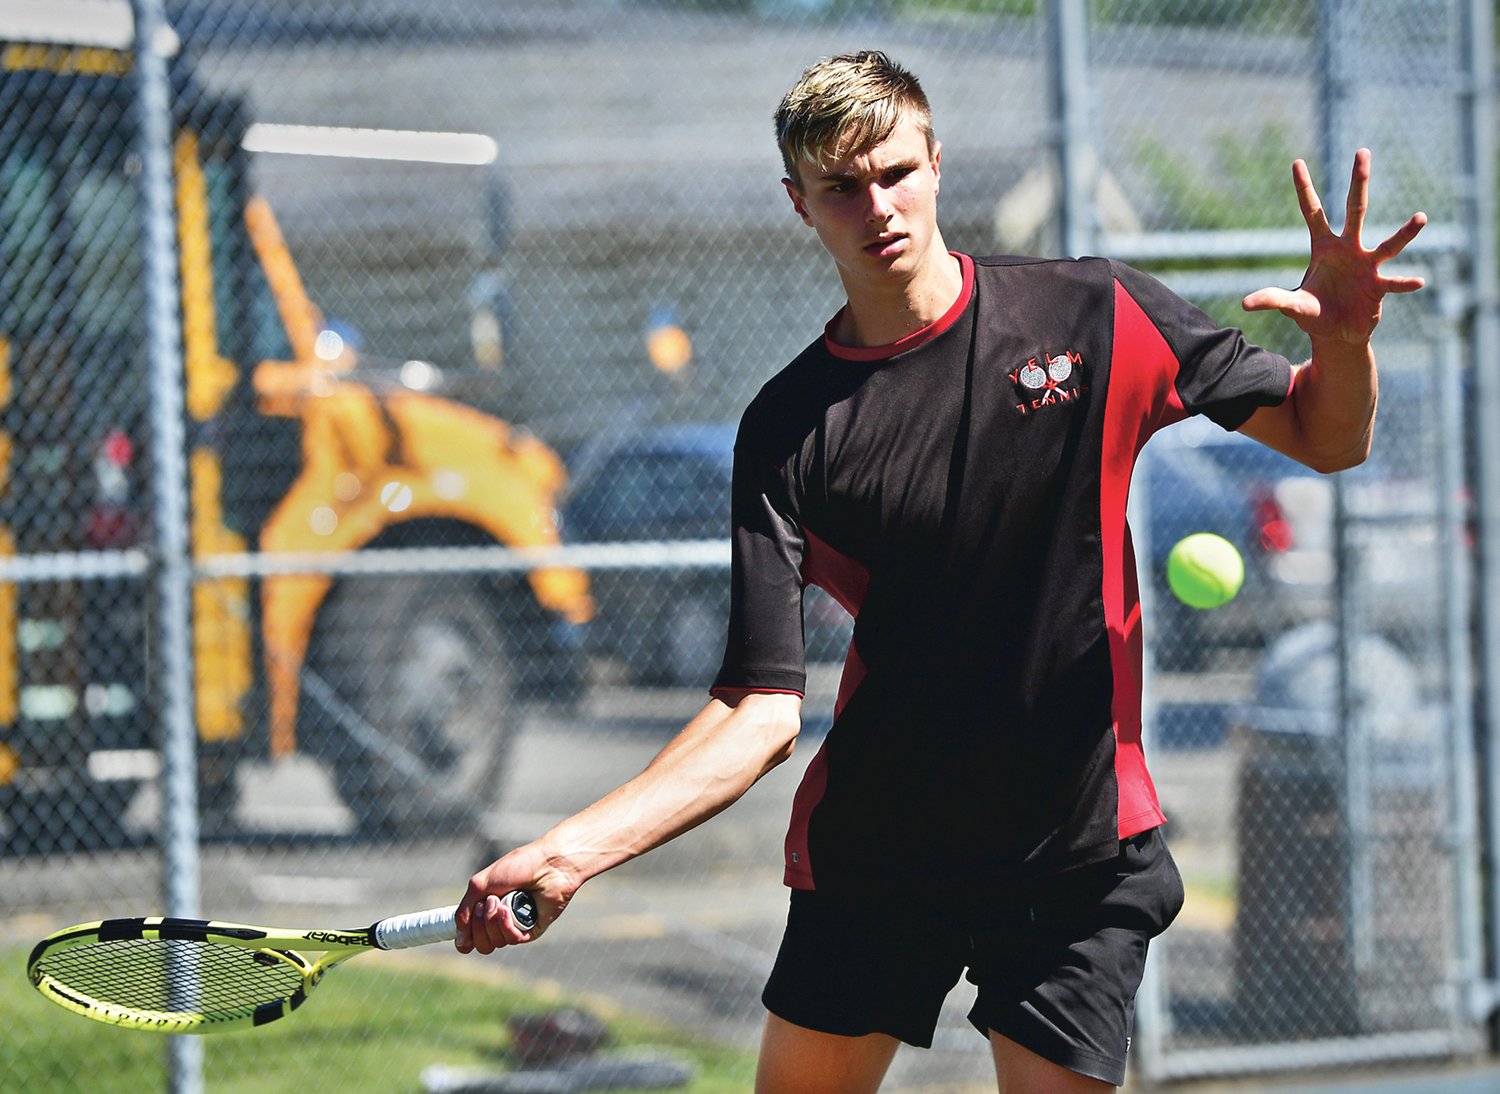 Yelm High School No. 1 boys tennis player Oliver Busina gets set to whack a forehand during his match against his opponent from River Ridge High School on Wednesday, June 2, in Lacey.